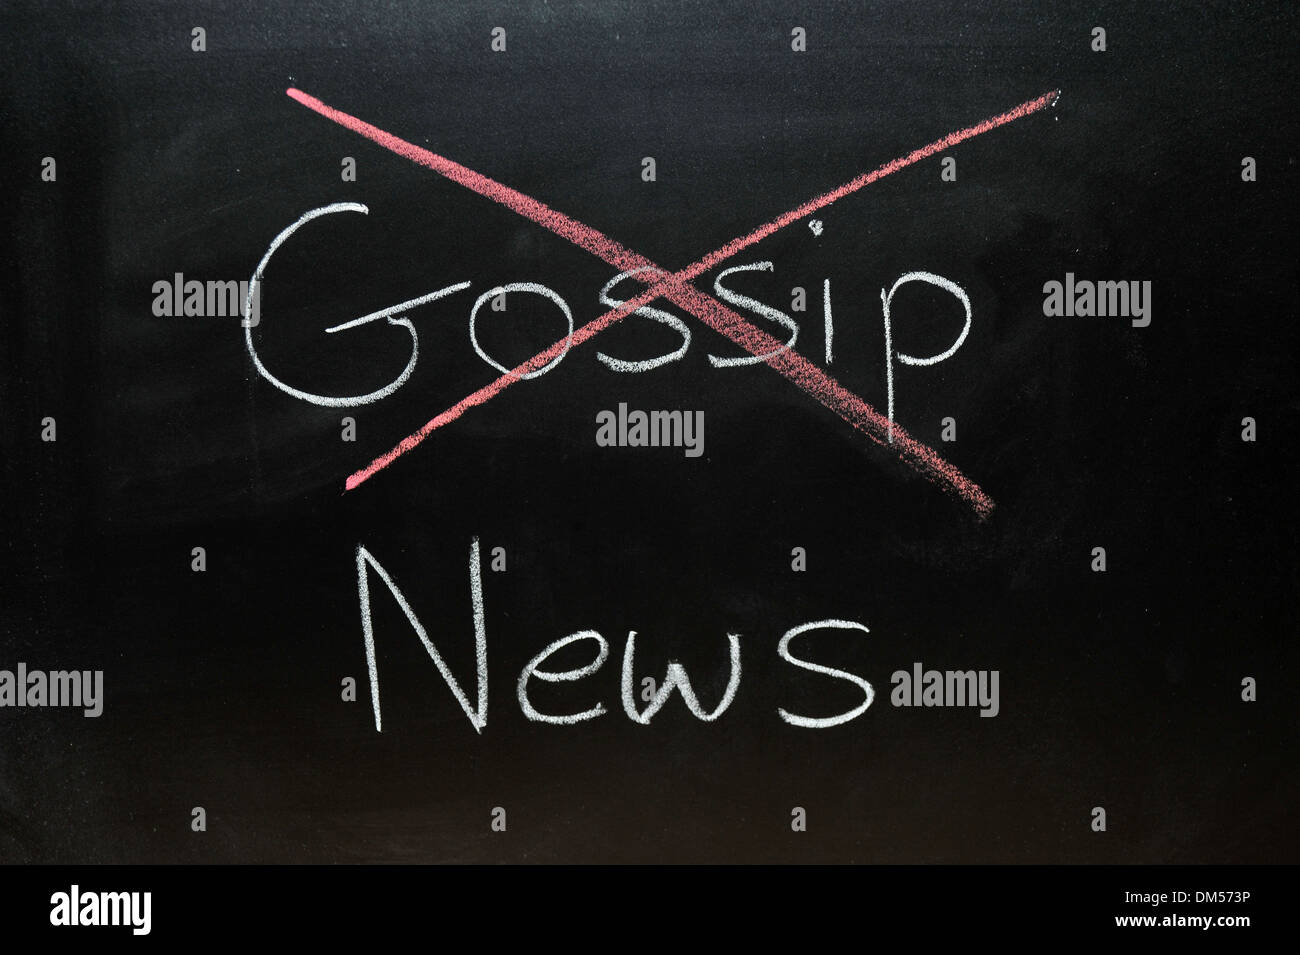 Gossip News drawn on a blackboard in chalk with gossip crossed out. Stock Photo